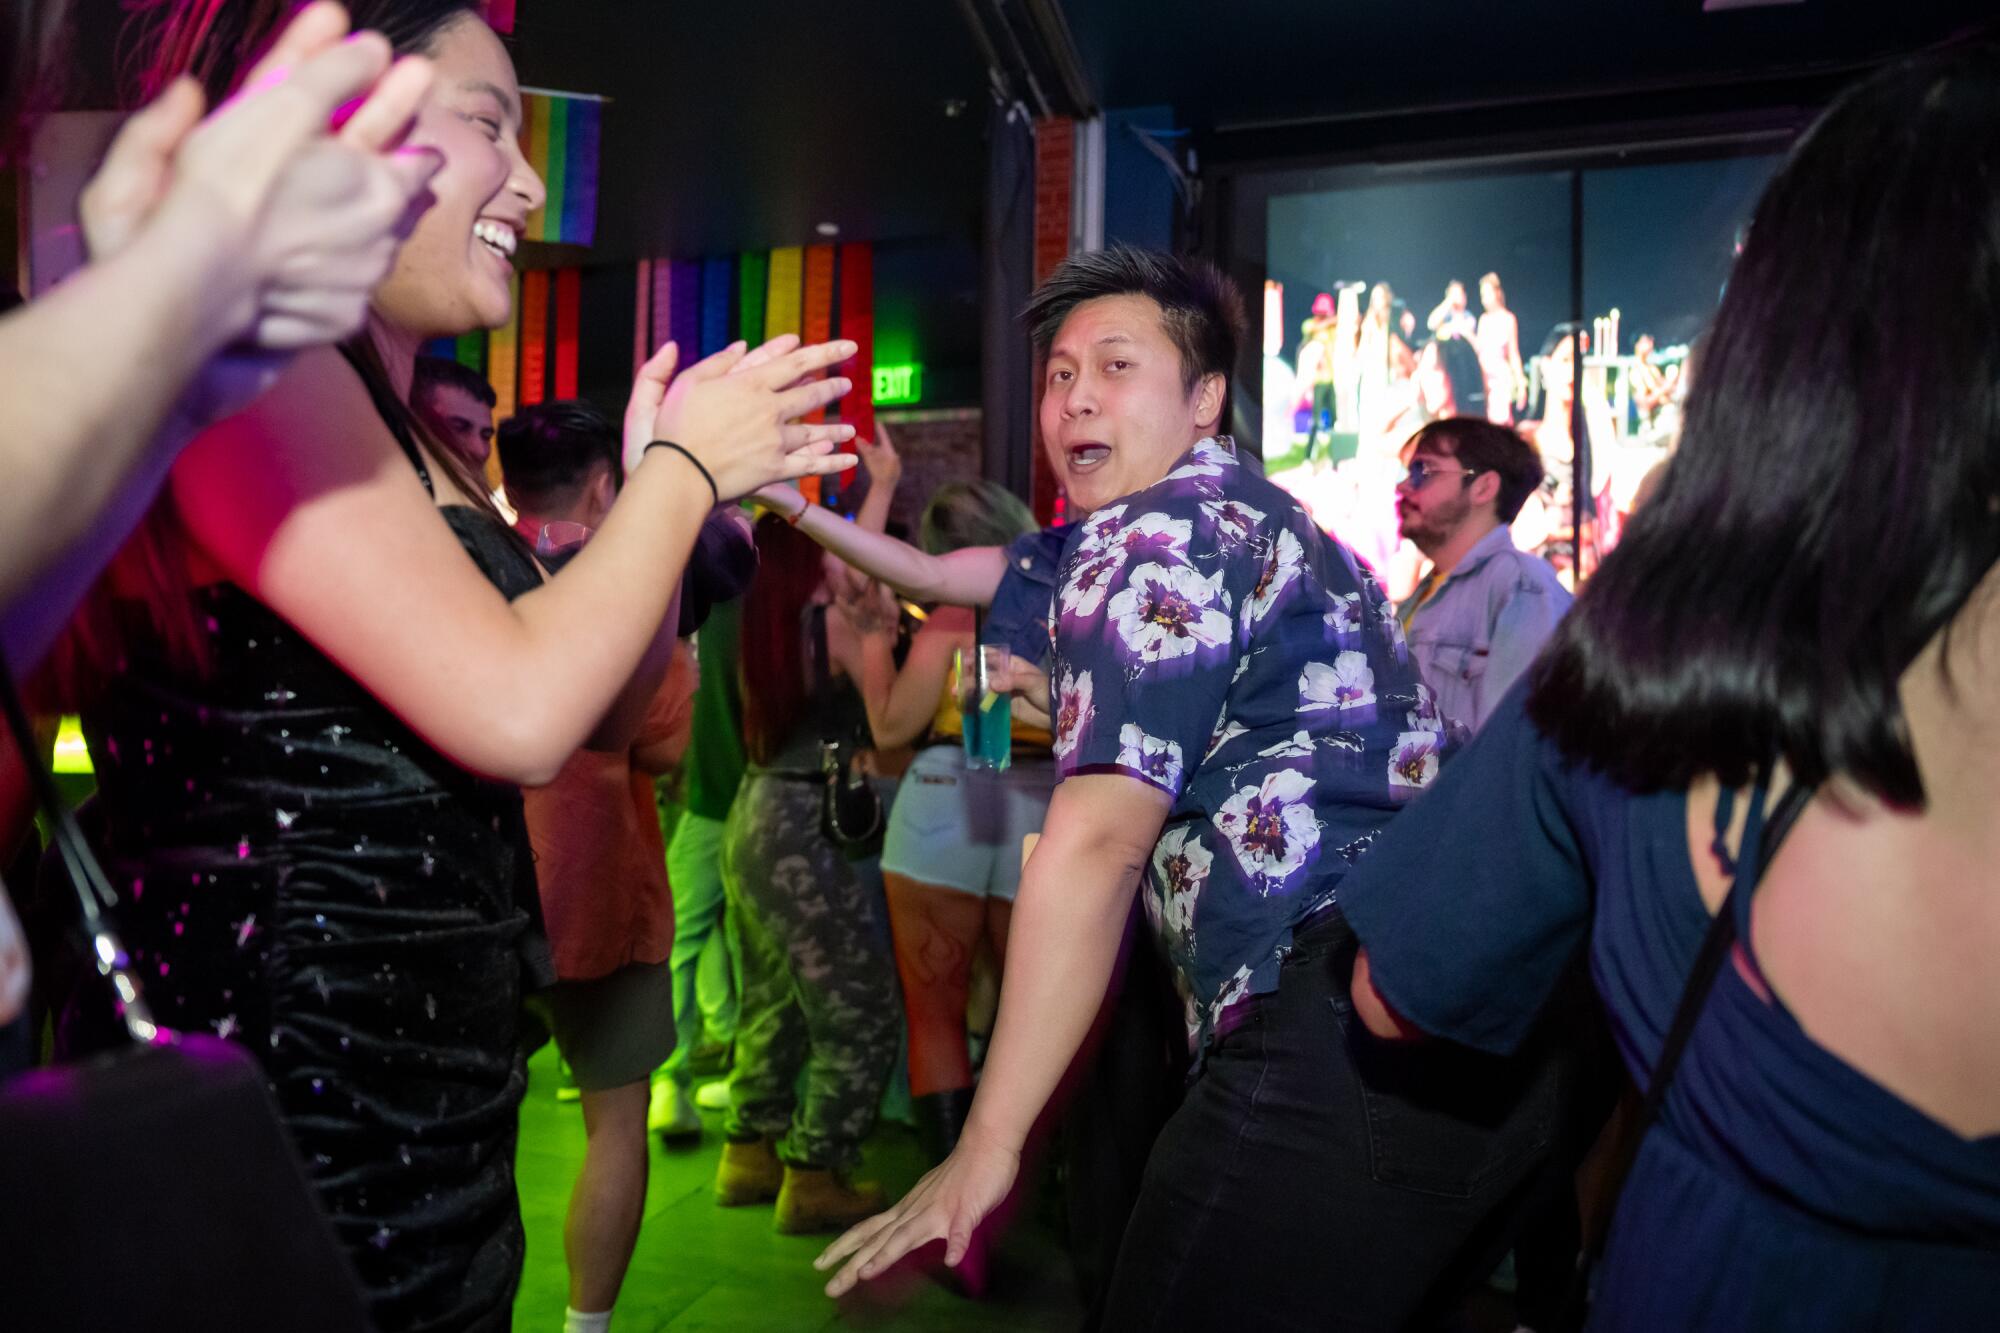 Cody Pham dances at QT Nightlife's K-Pop Night at Micky's West Hollywood.